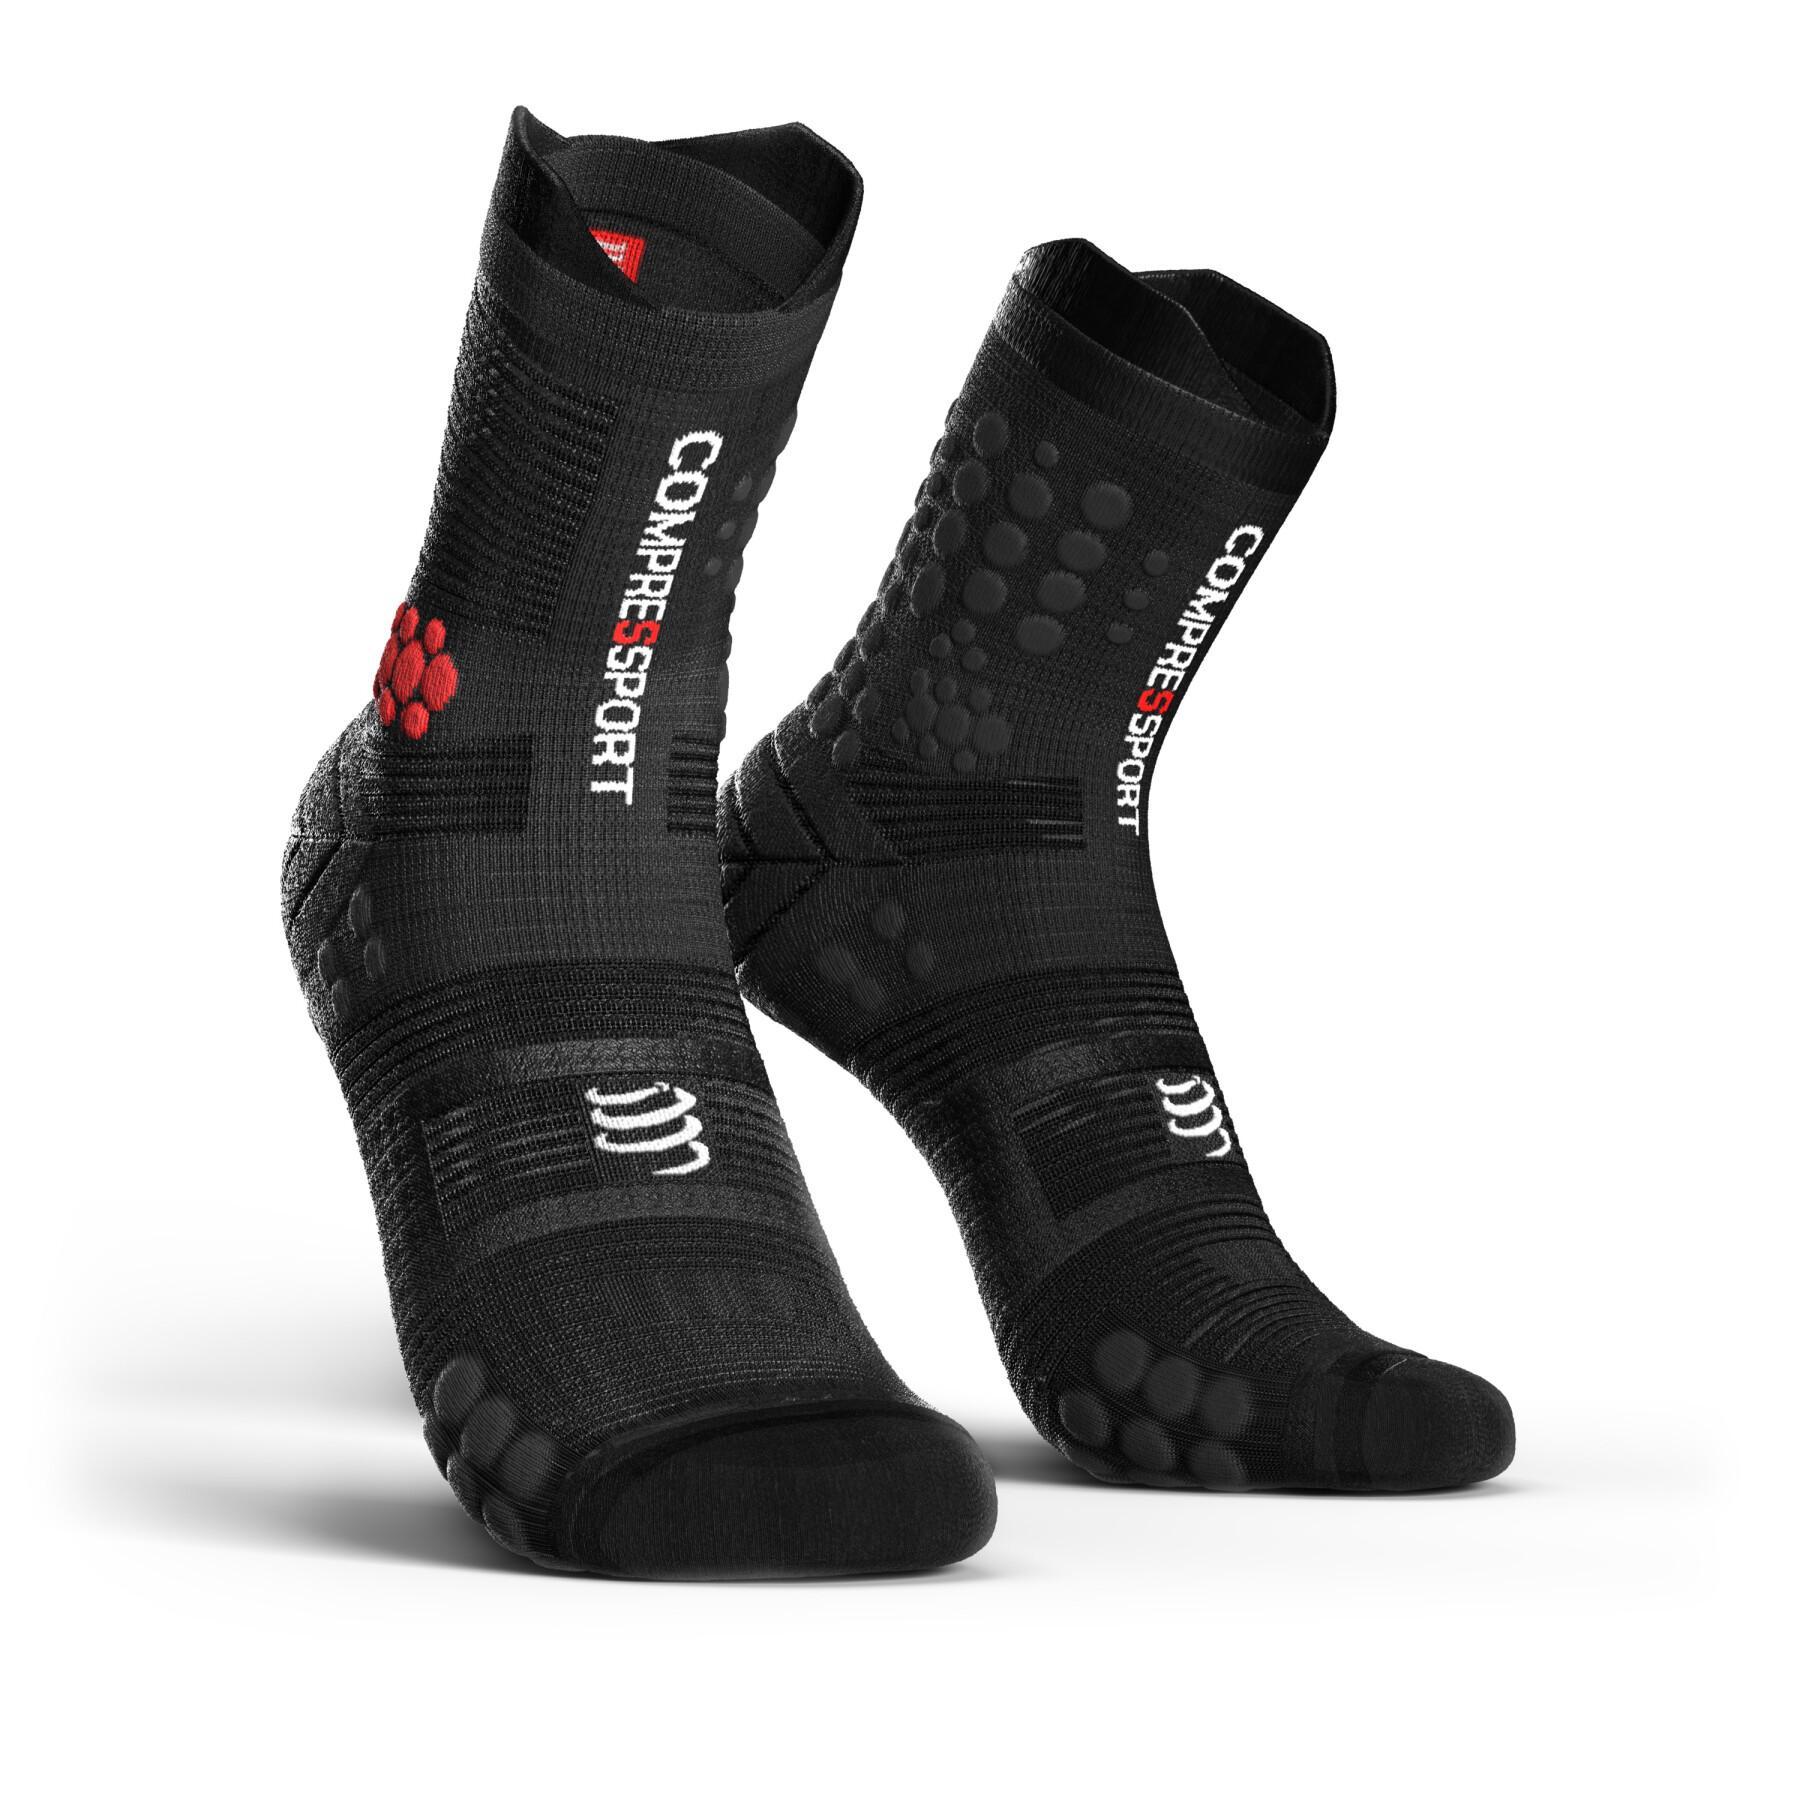 Chaussettes Compressport Pro Racing 3 Trail